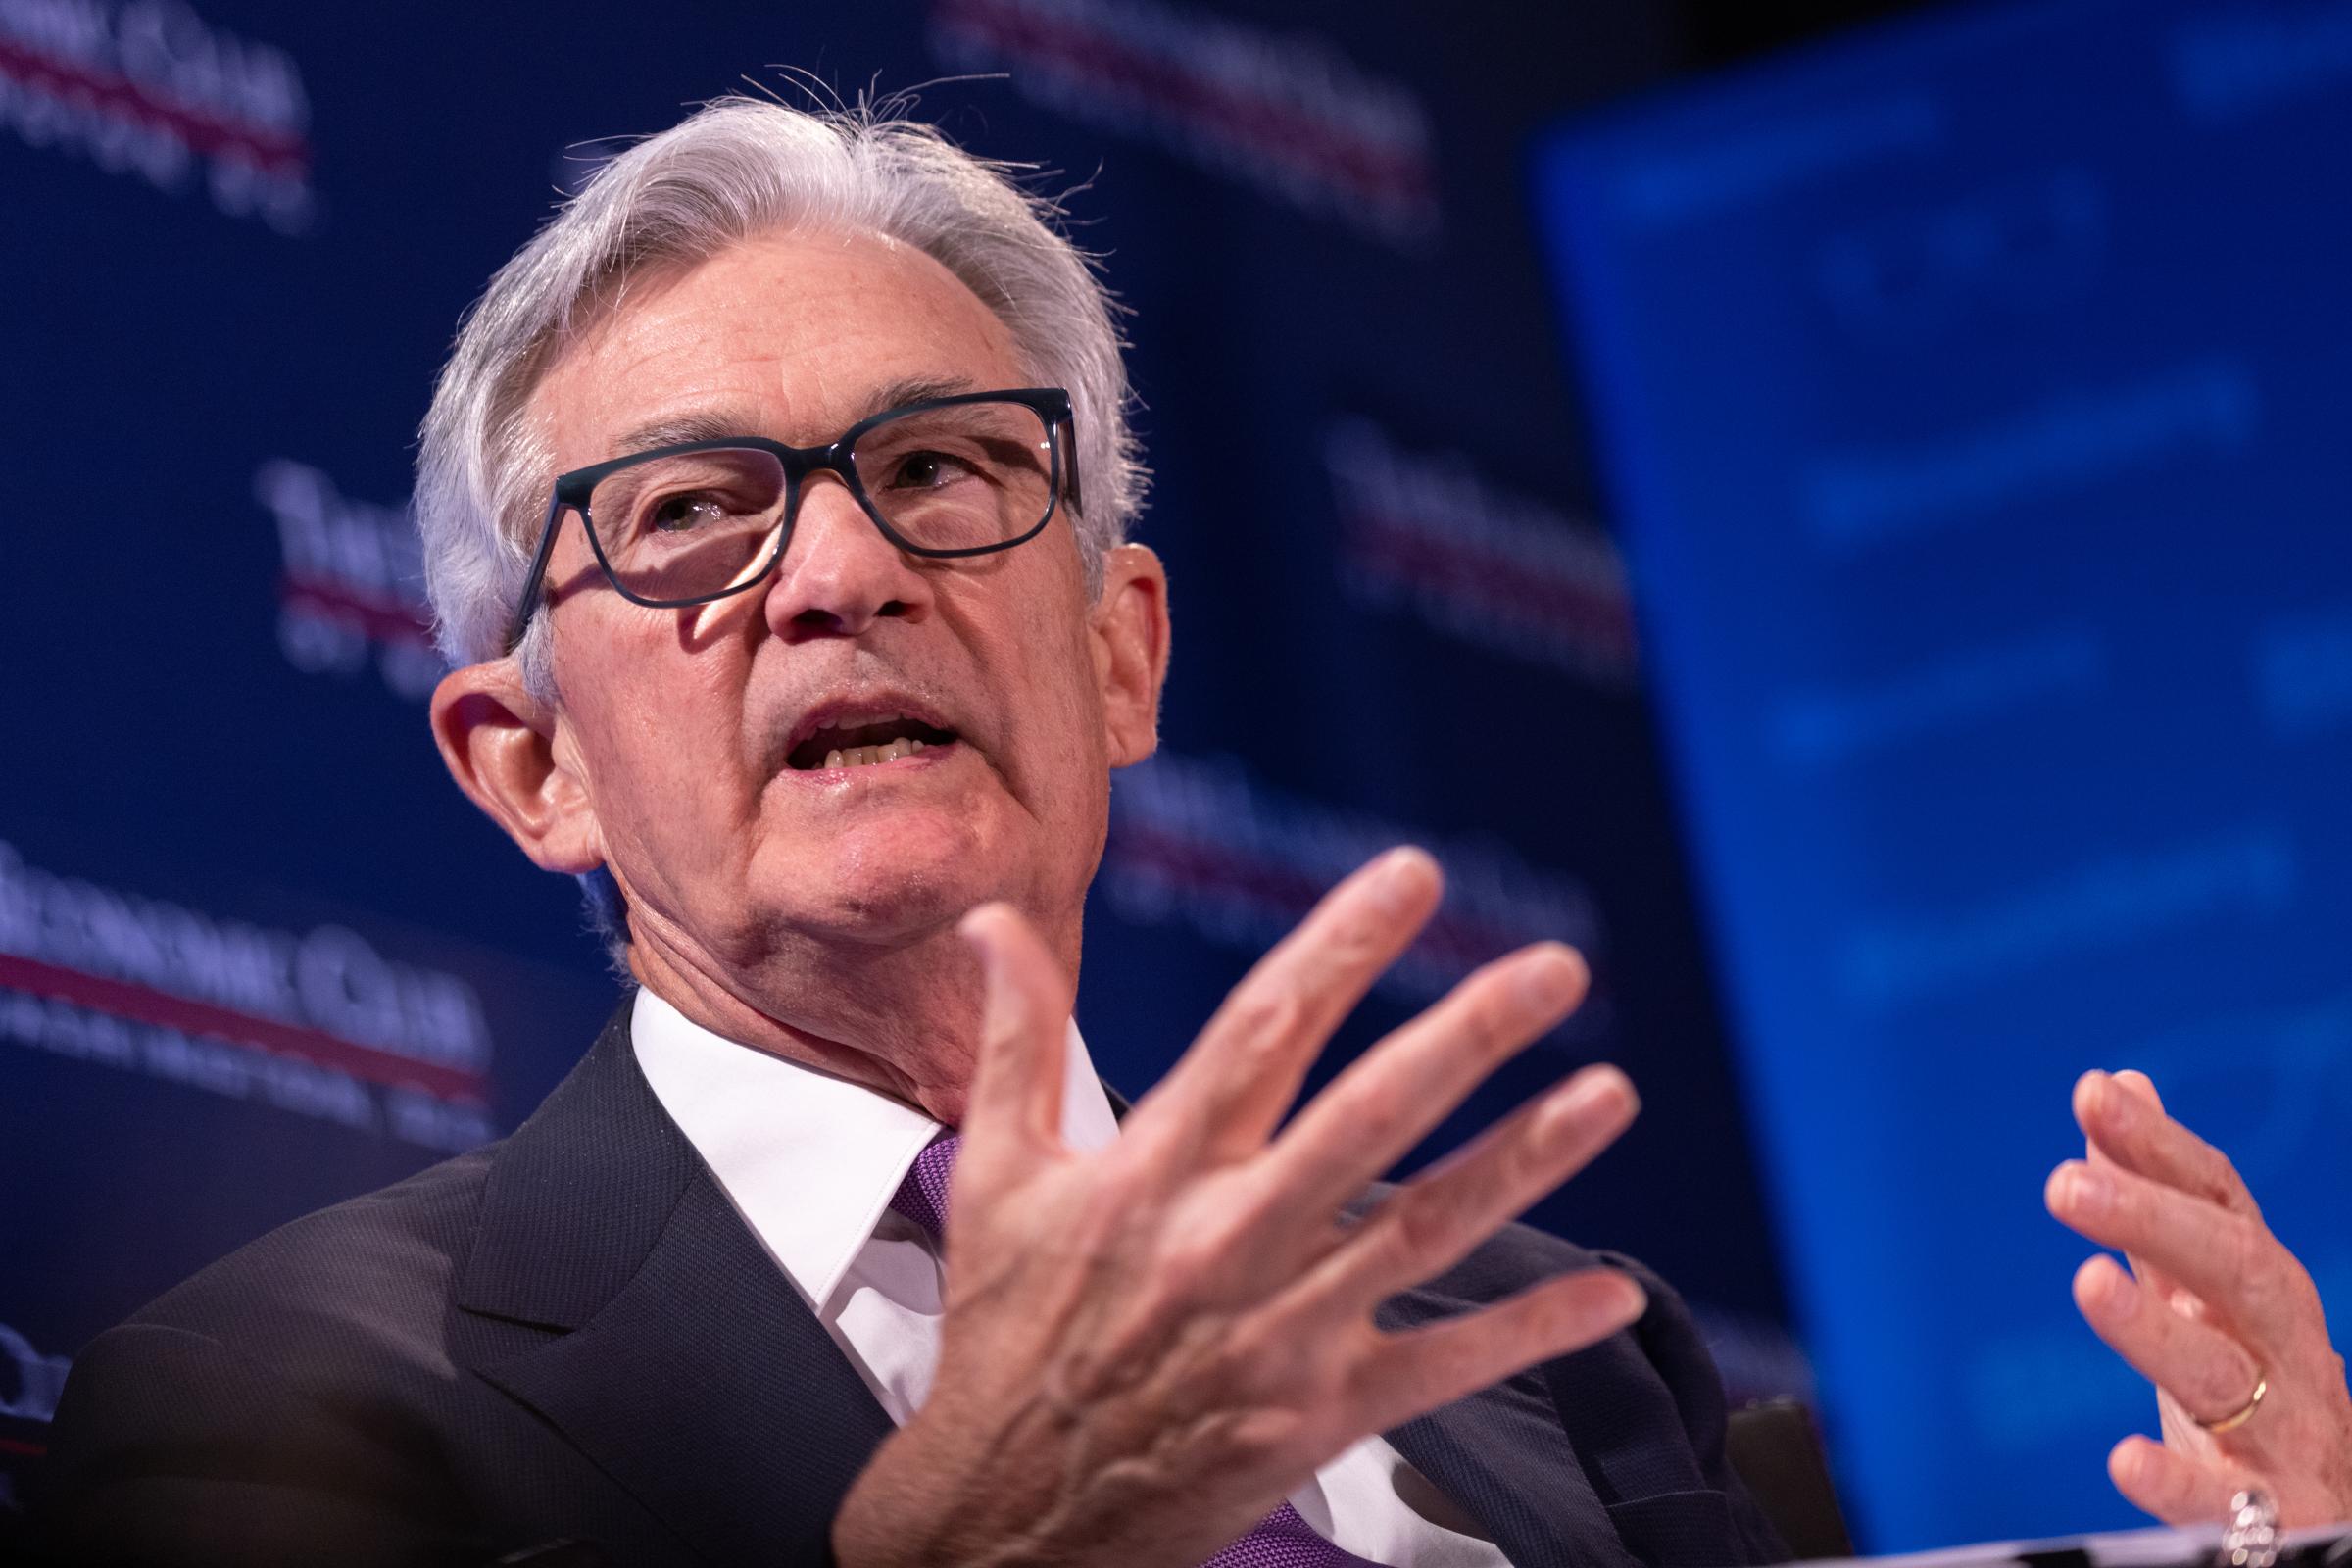 Fed Chair Jerome Powell Speaks At The Economic Club Of Washington D.C.